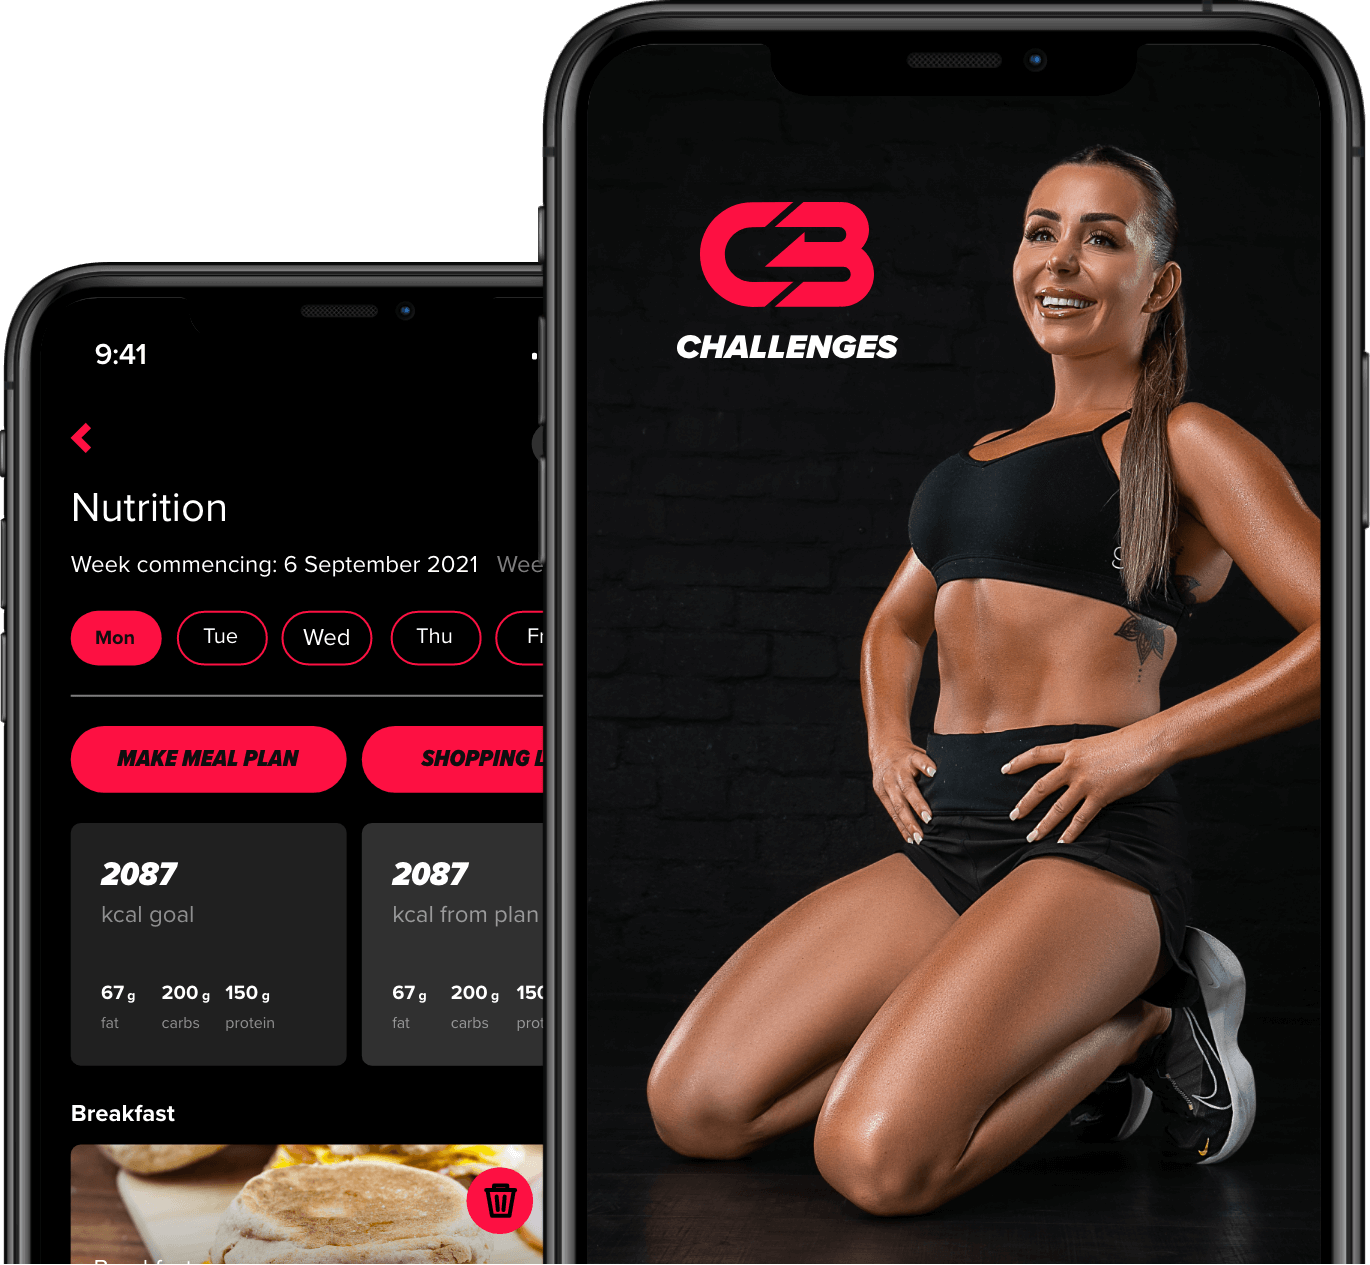 28 Day Fitness Challenges | Courtney Black Fitness App